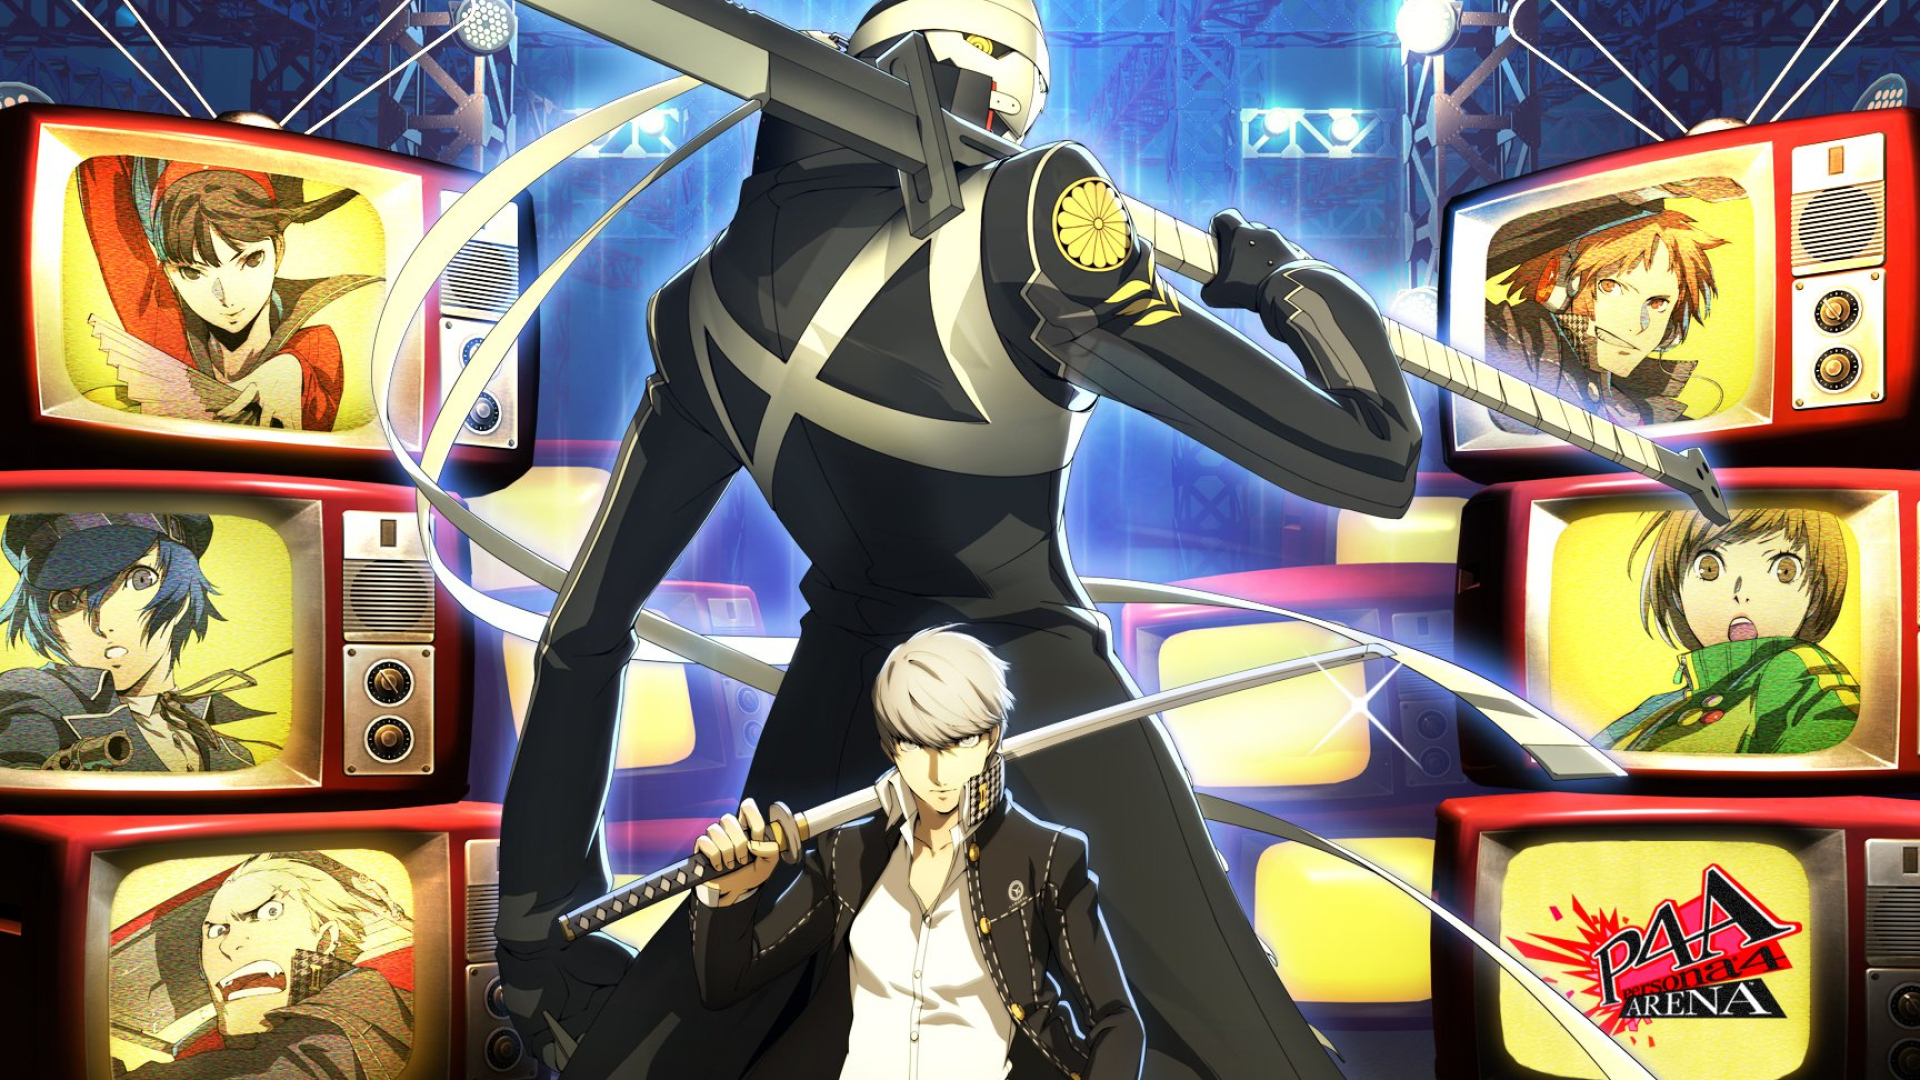 1920x1080 40+ Persona 4: Arena HD Wallpapers and Backgrounds